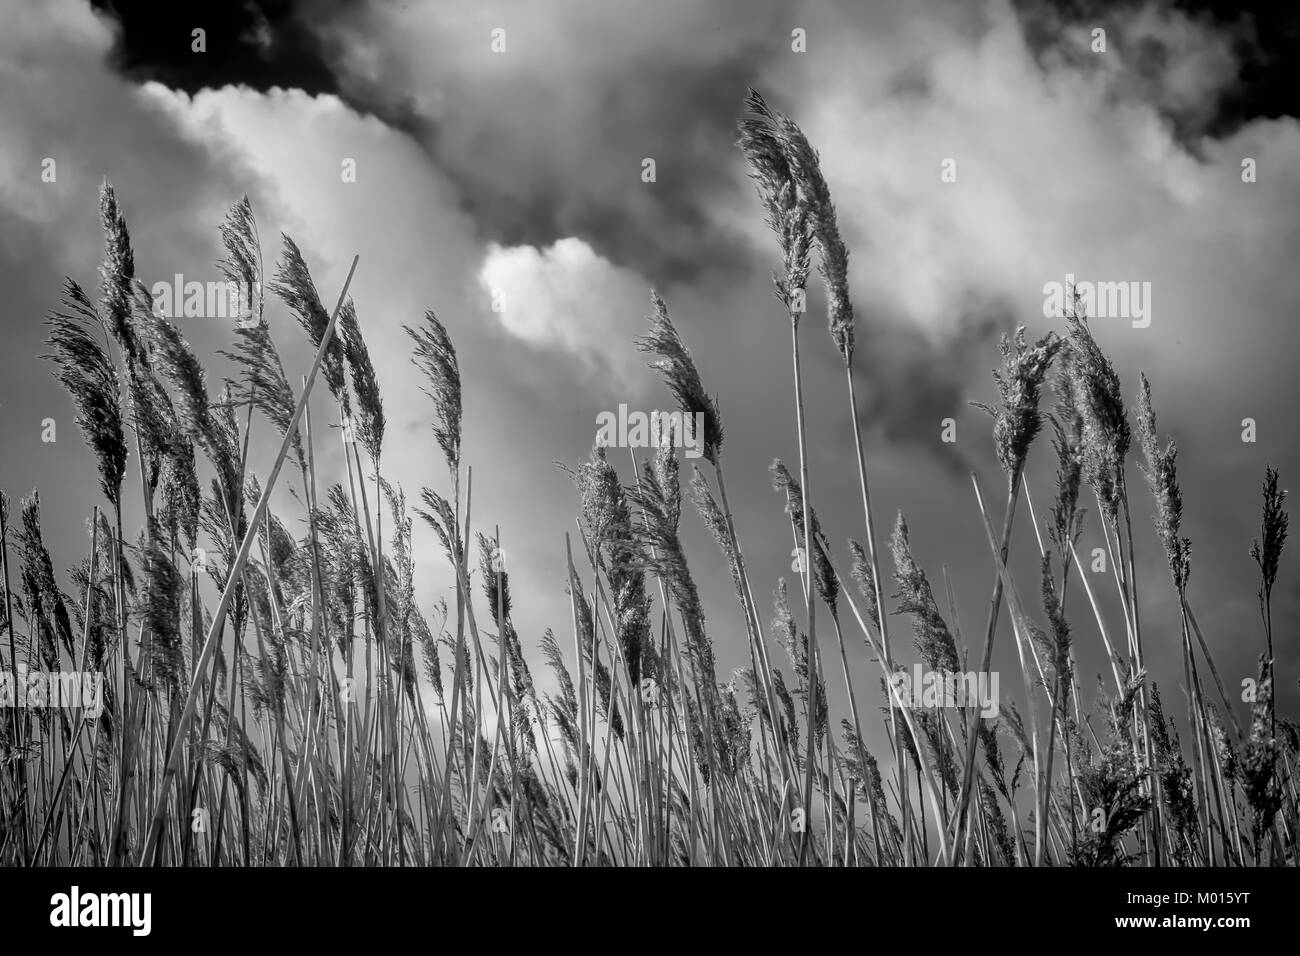 A Black and White image of Reeds with a cloudy sky as a background Stock Photo